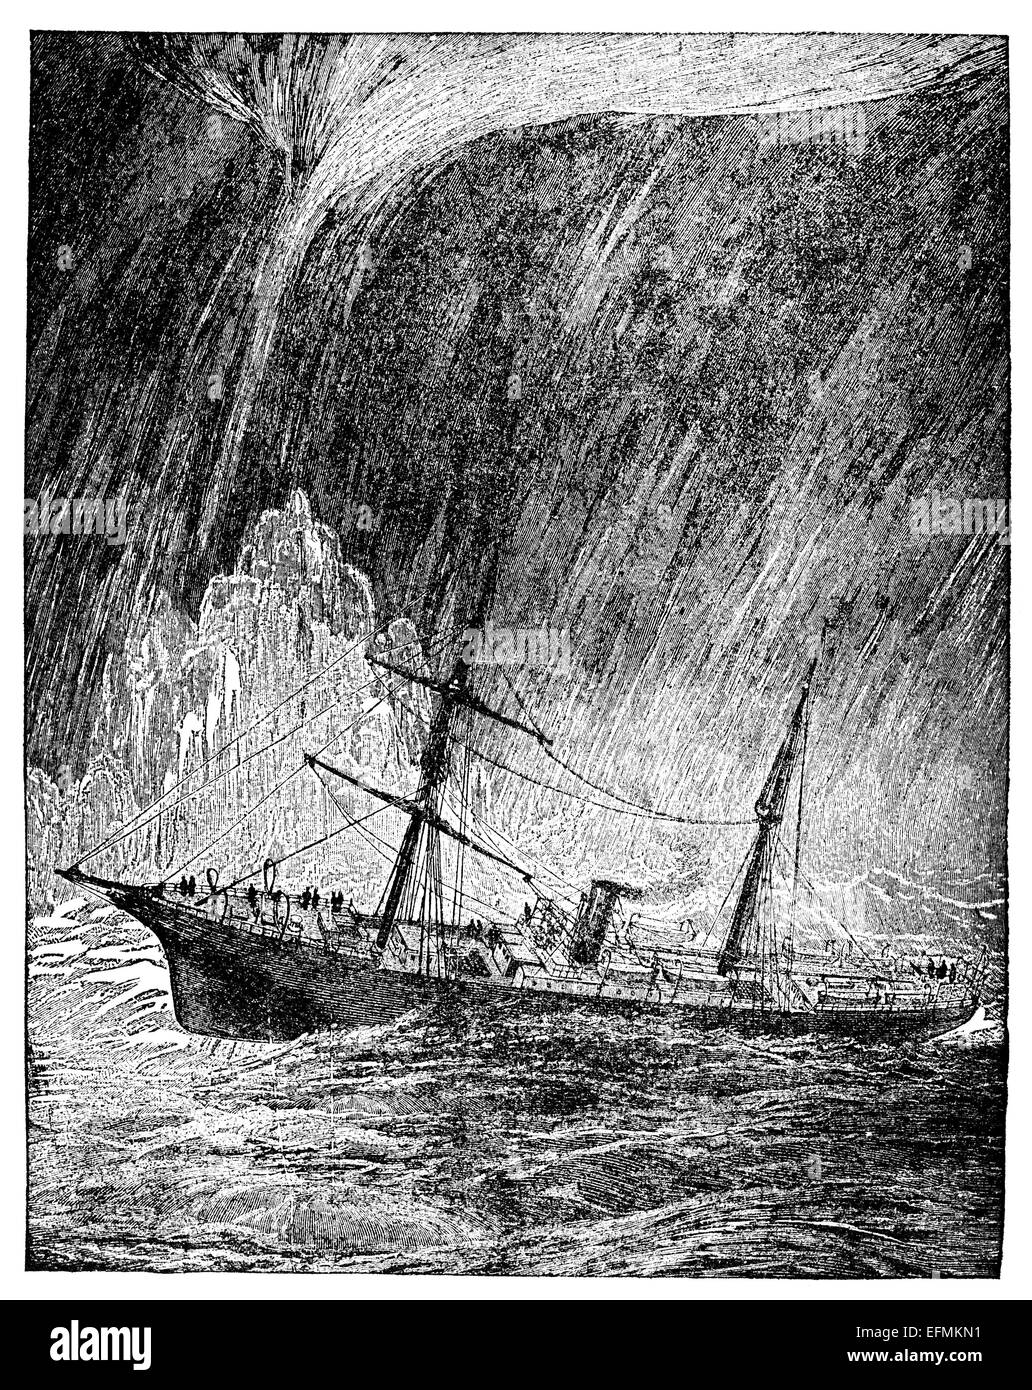 19th century engraving of a steamship on a stormy ocean with a waterspout Stock Photo